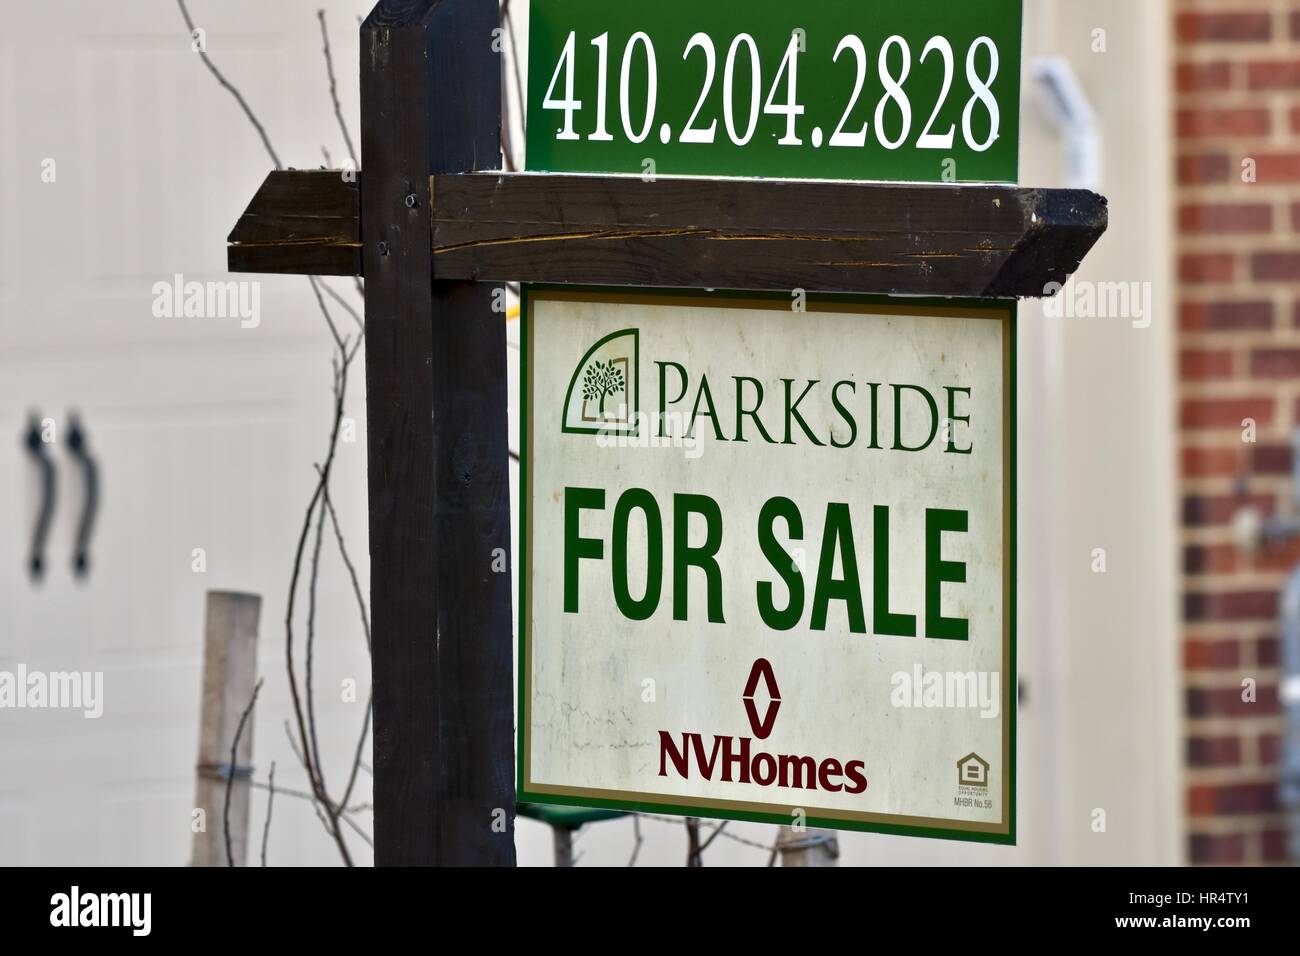 NV homes build site for sale Stock Photo